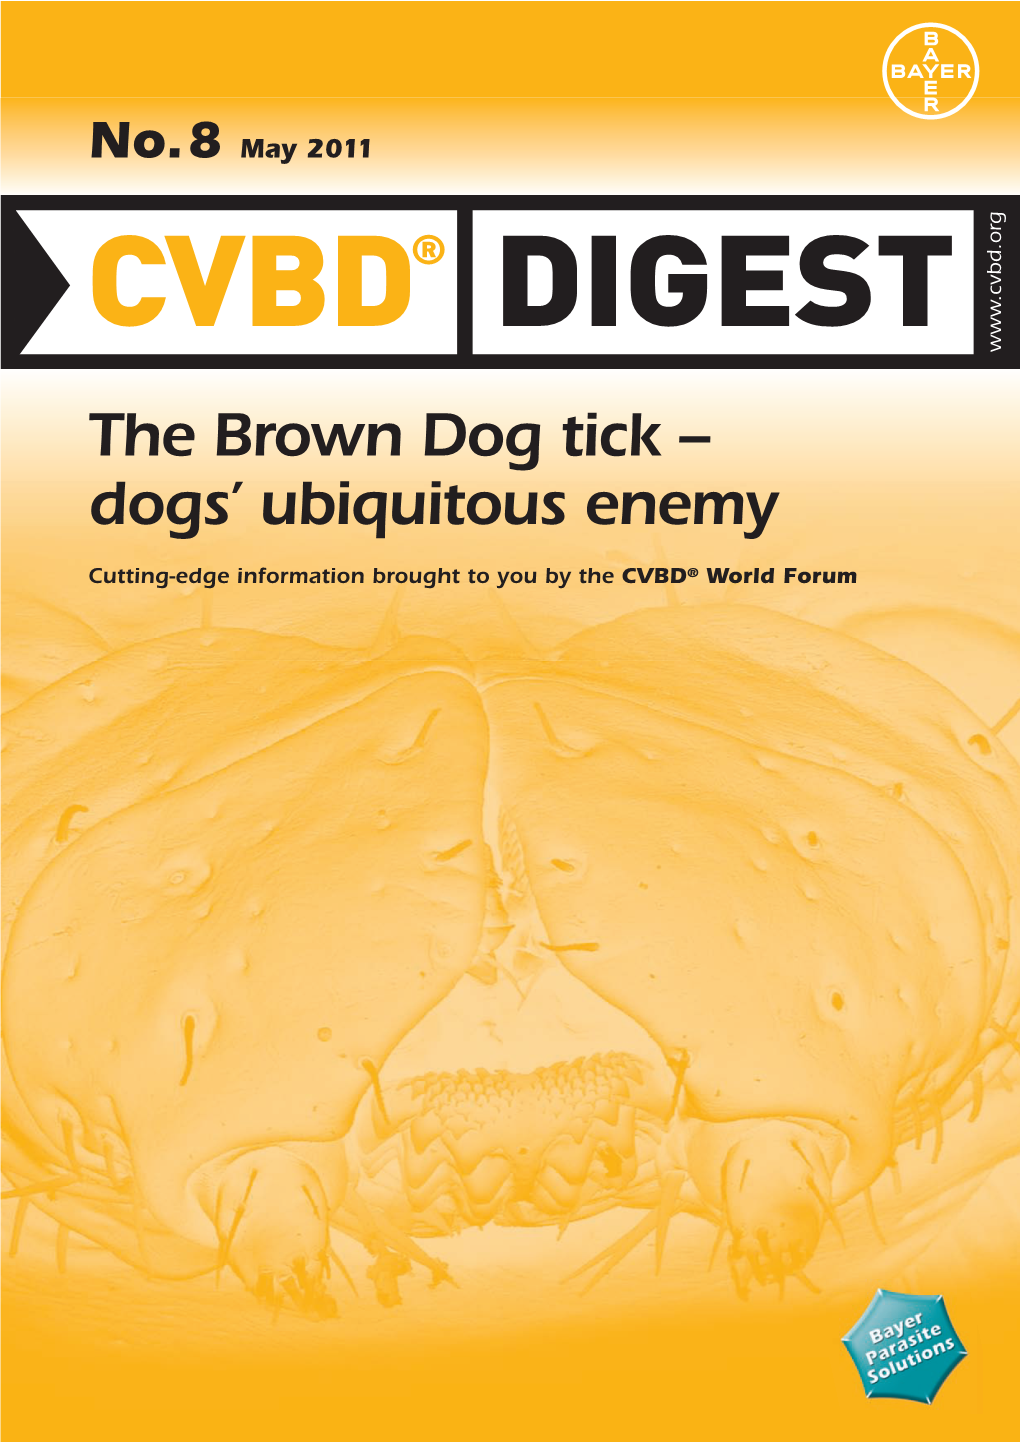 The Brown Dog Tick – Dogs’ Ubiquitous Enemy